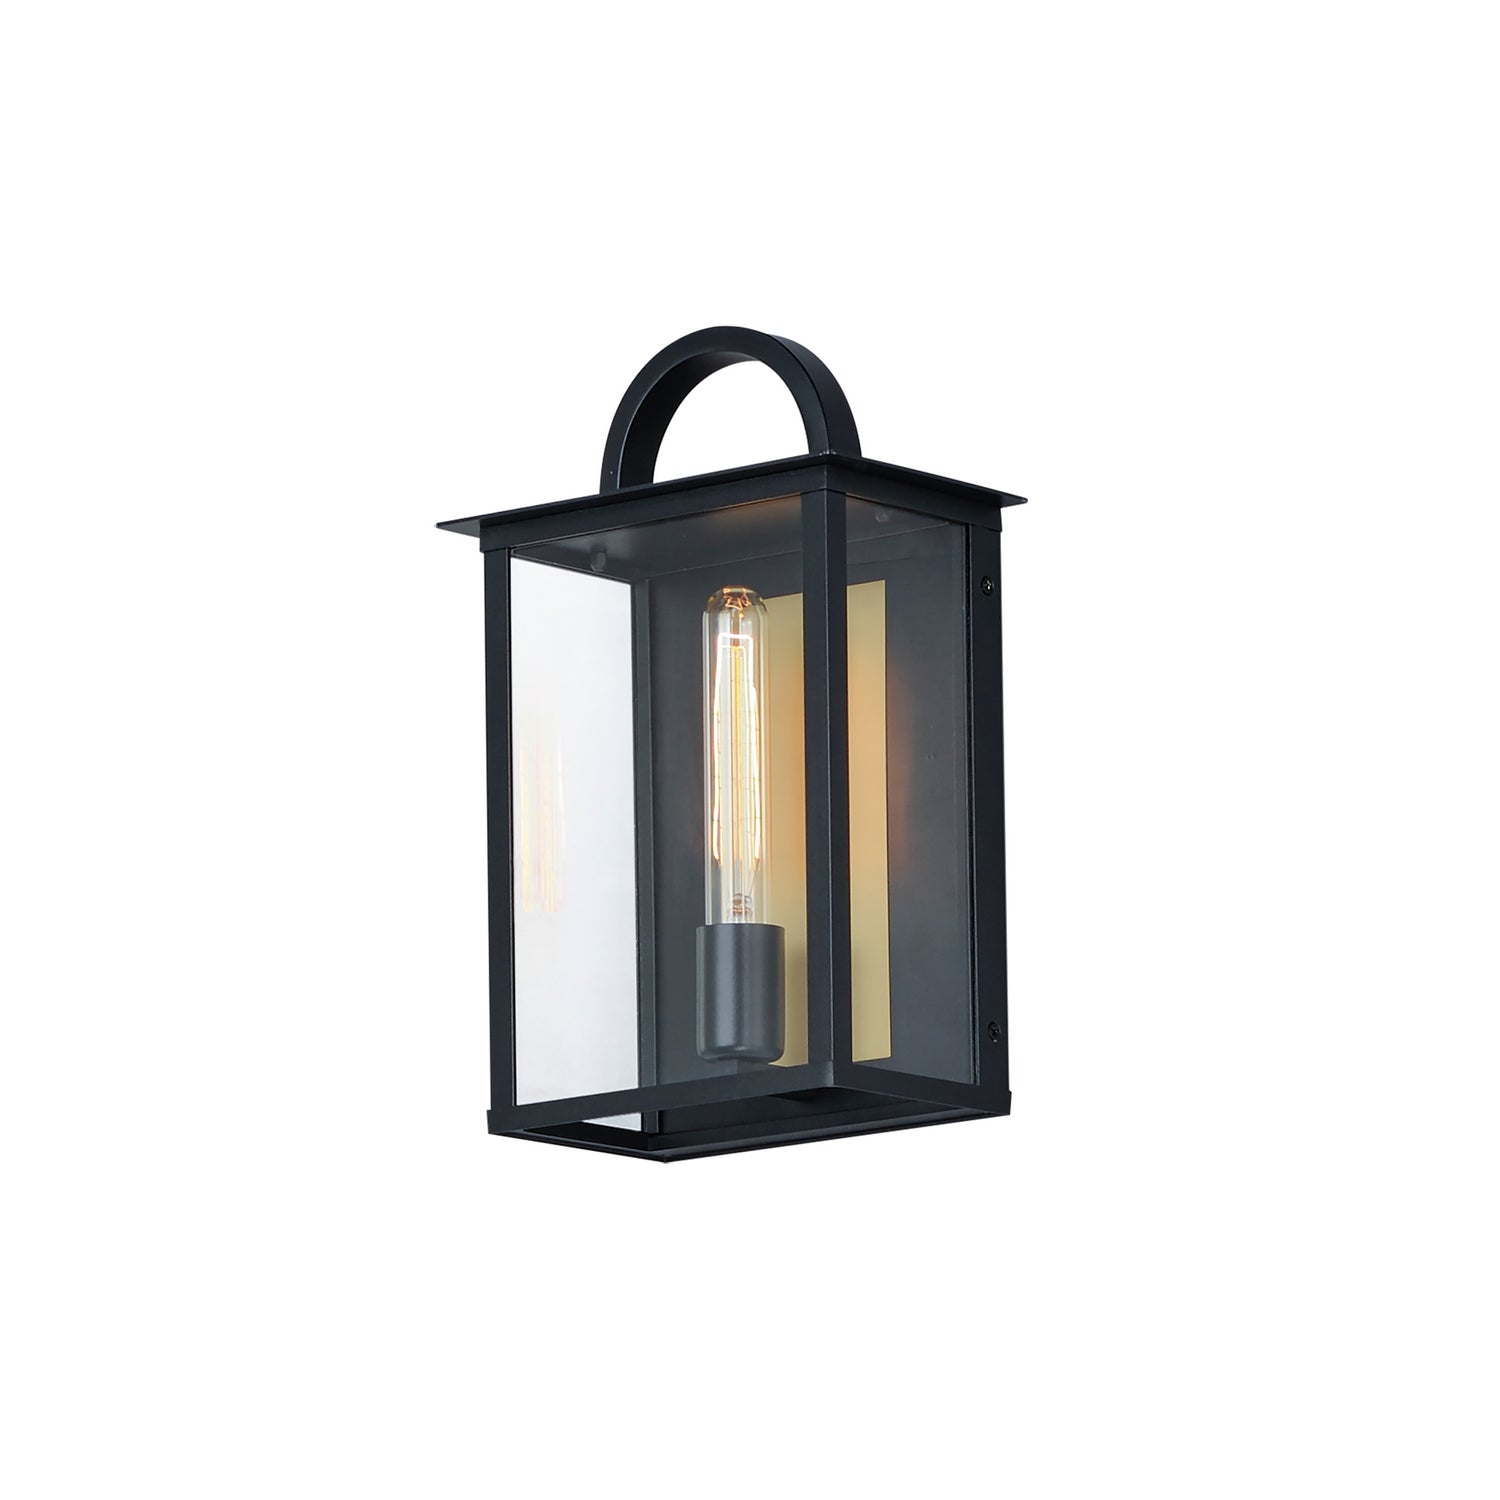 Maxim - 30752CLBK - One Light Outdoor Wall Sconce - Manchester - Black